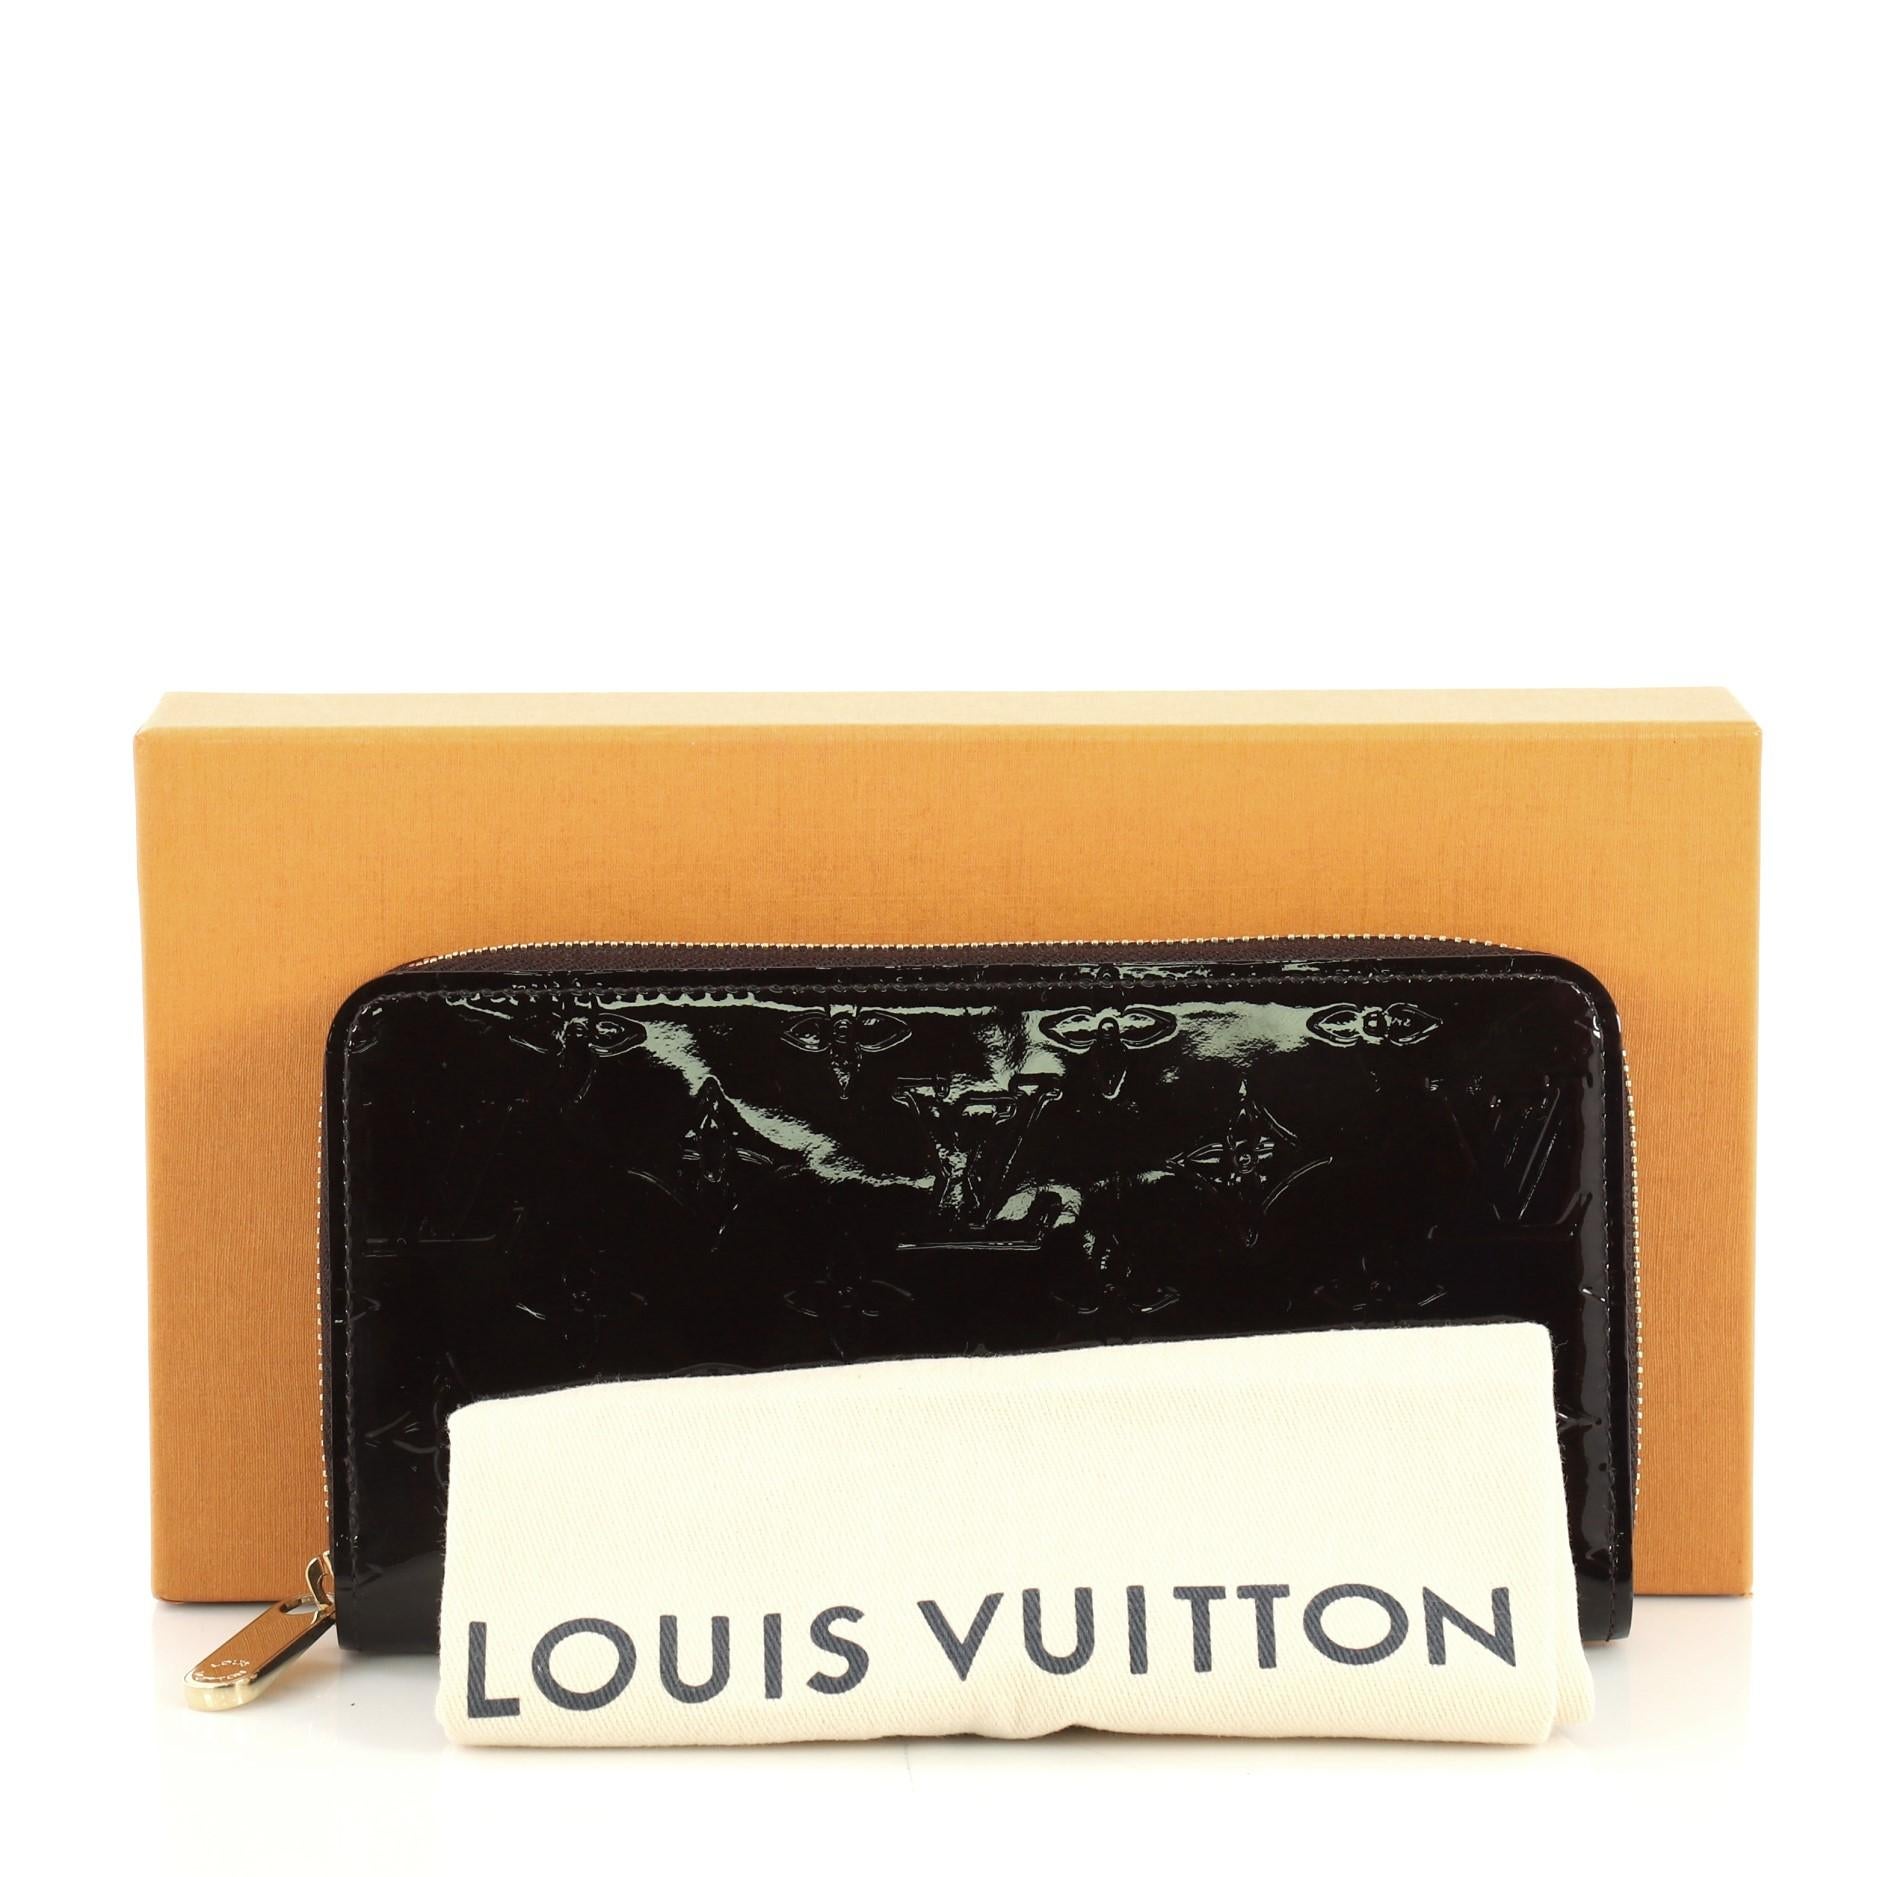 This Louis Vuitton Zippy Wallet Monogram Vernis, crafted in purple monogram vernis, features gold-tone hardware. Its all-around zip closure opens to a purple leather interior with a middle zip compartment, slip pocket, and multiple card slots.